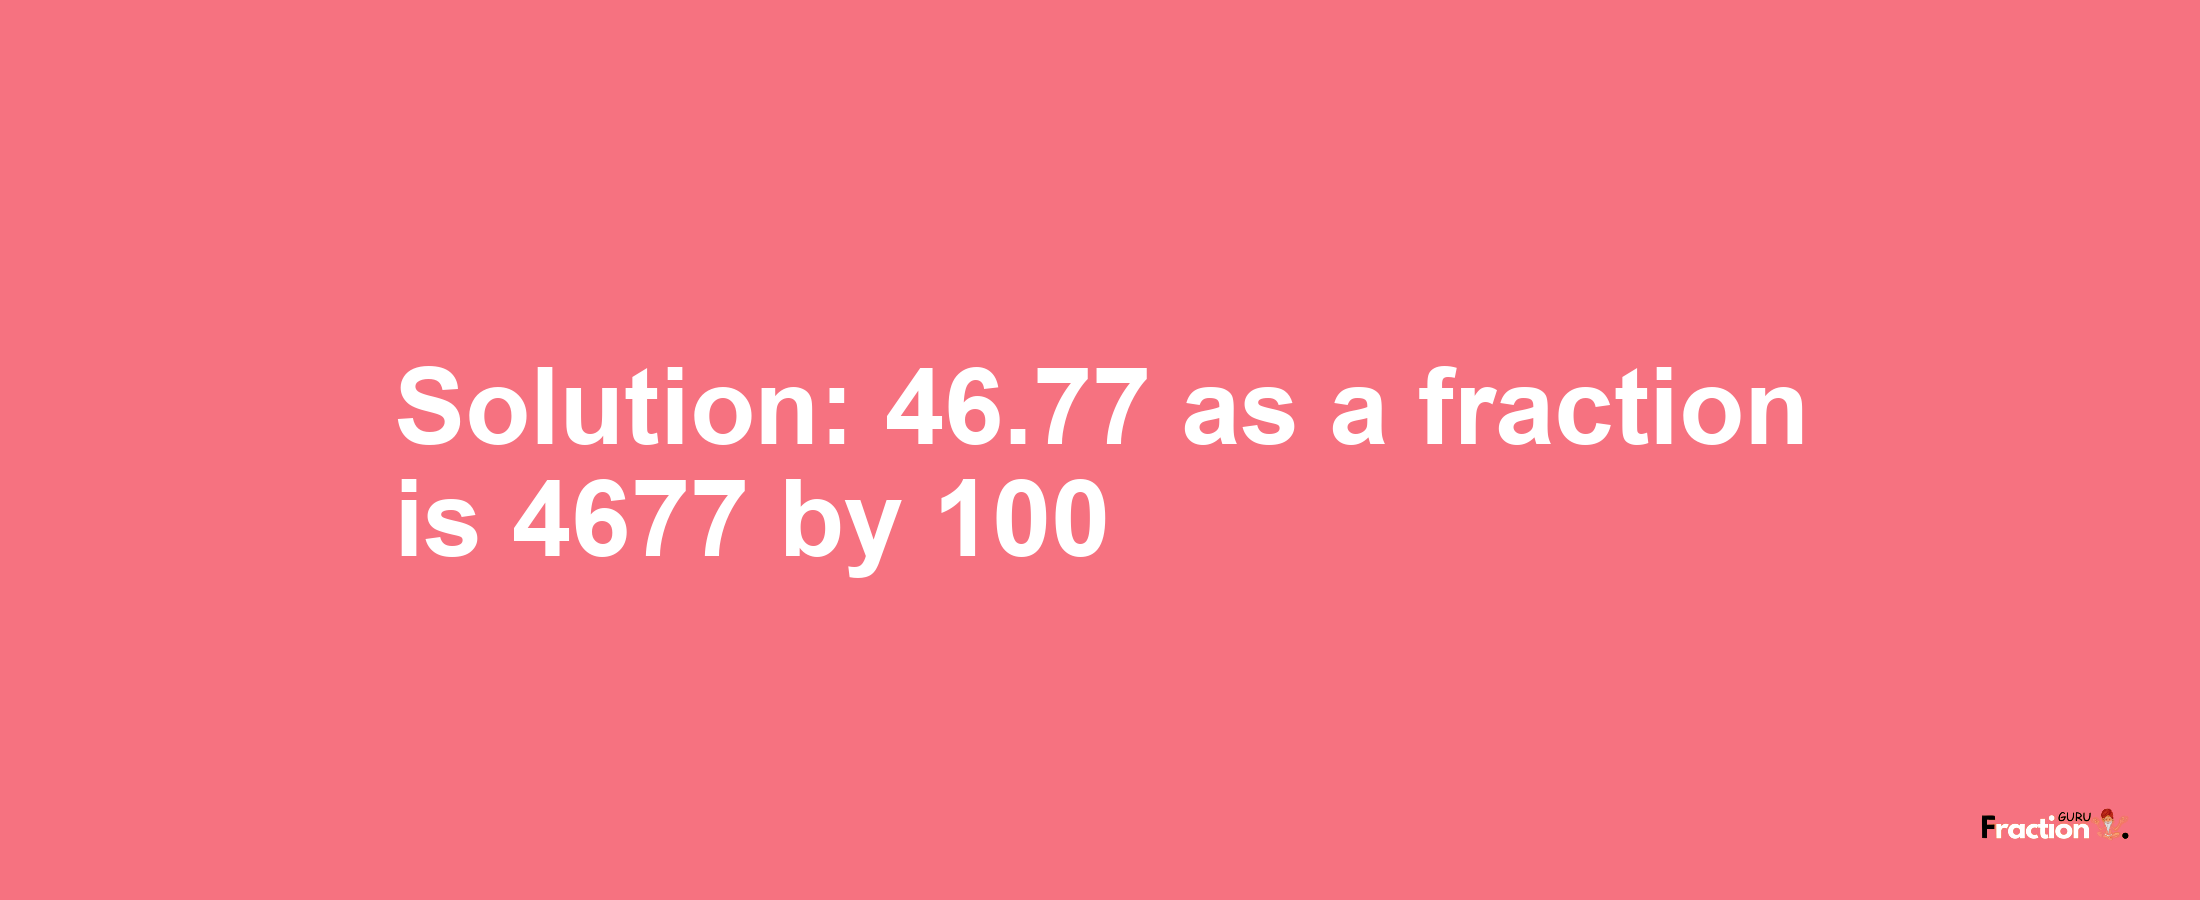 Solution:46.77 as a fraction is 4677/100